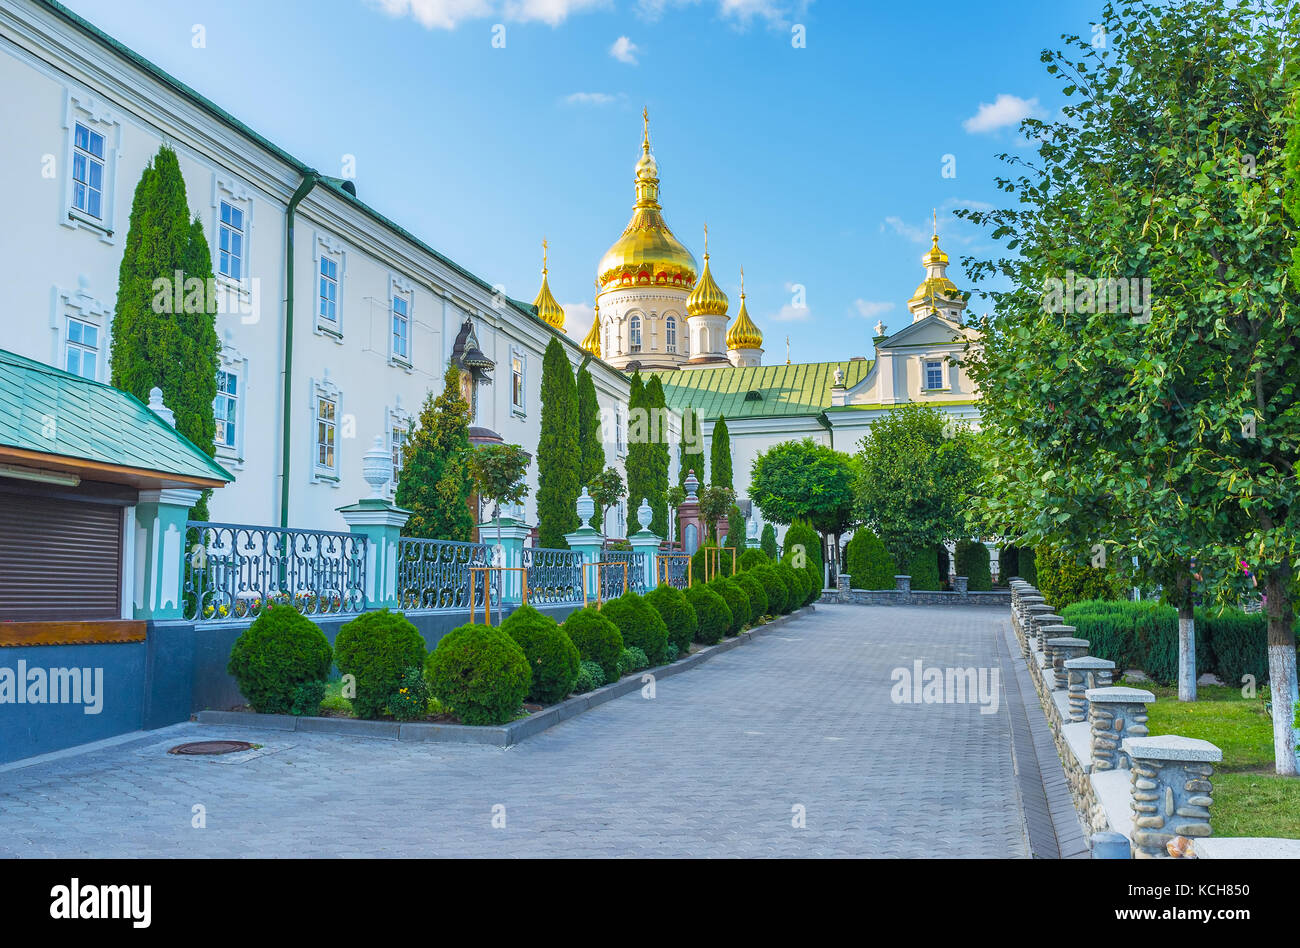 The courtyard of brotherhood's corps with narrow alley surrounded with monastery garden, Pochaev, Ukraine Stock Photo